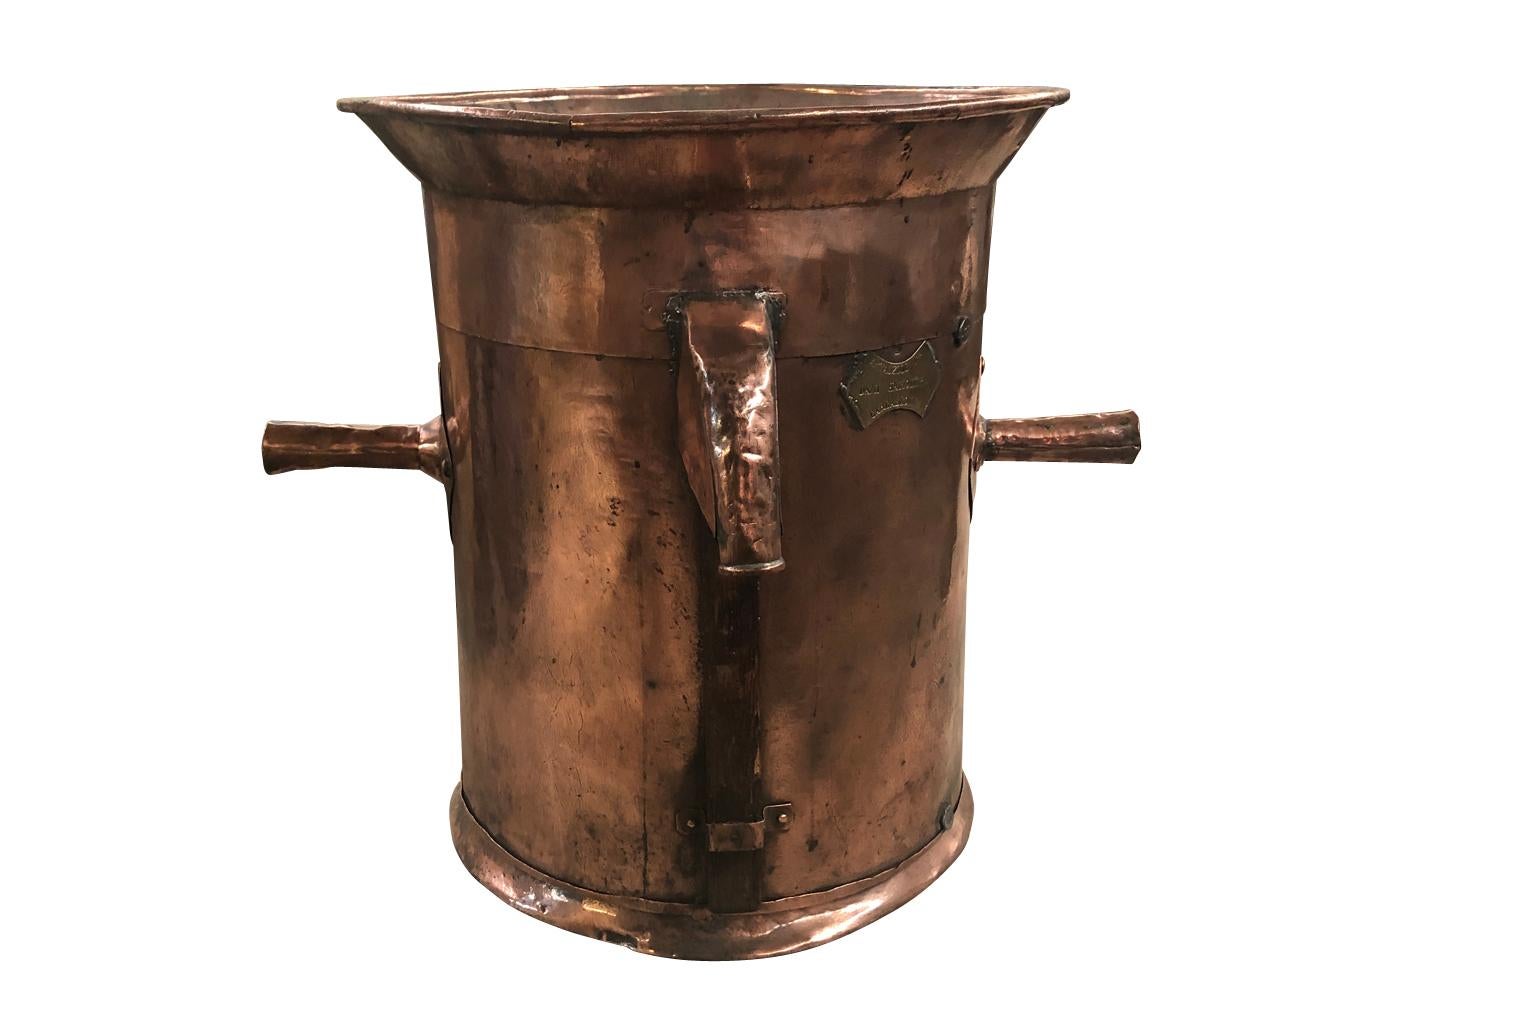 A very beautiful French 19th century Demi Hectolitre - Wine Measure in copper from the Carcassonne in the south of France. A terrific vessel or container to be used in so many ways or converted into a side table.